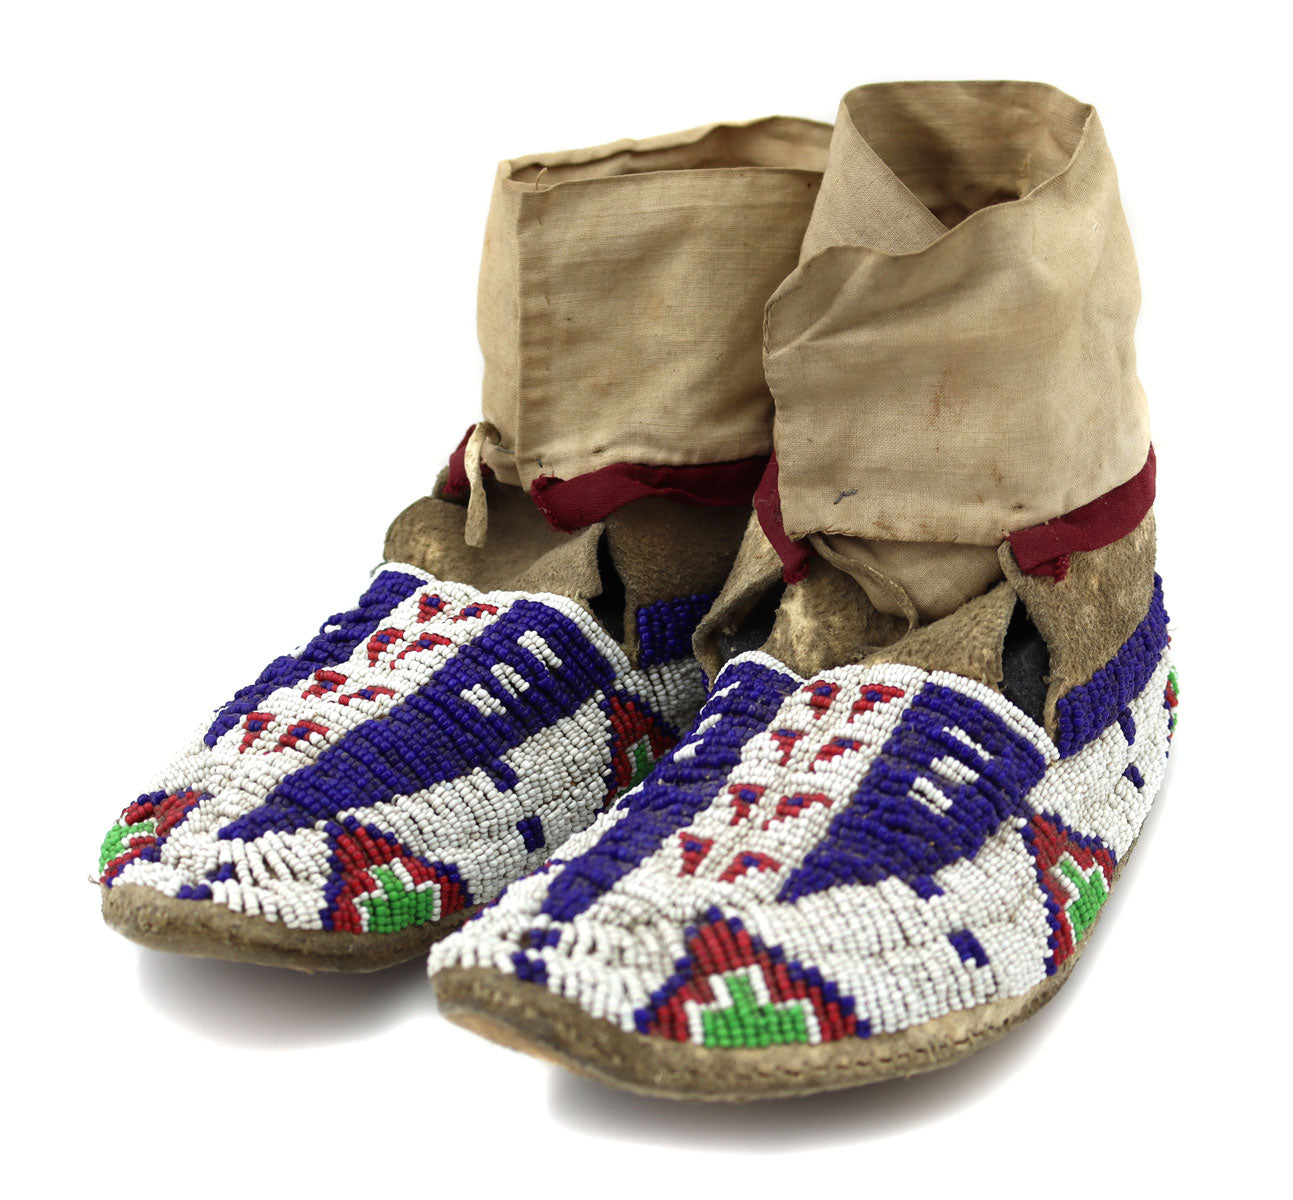 Sioux Beaded Leather Moccasins c. 1890s, 2.75" x 8.5" x 3.25" (DW91963-1021-019)